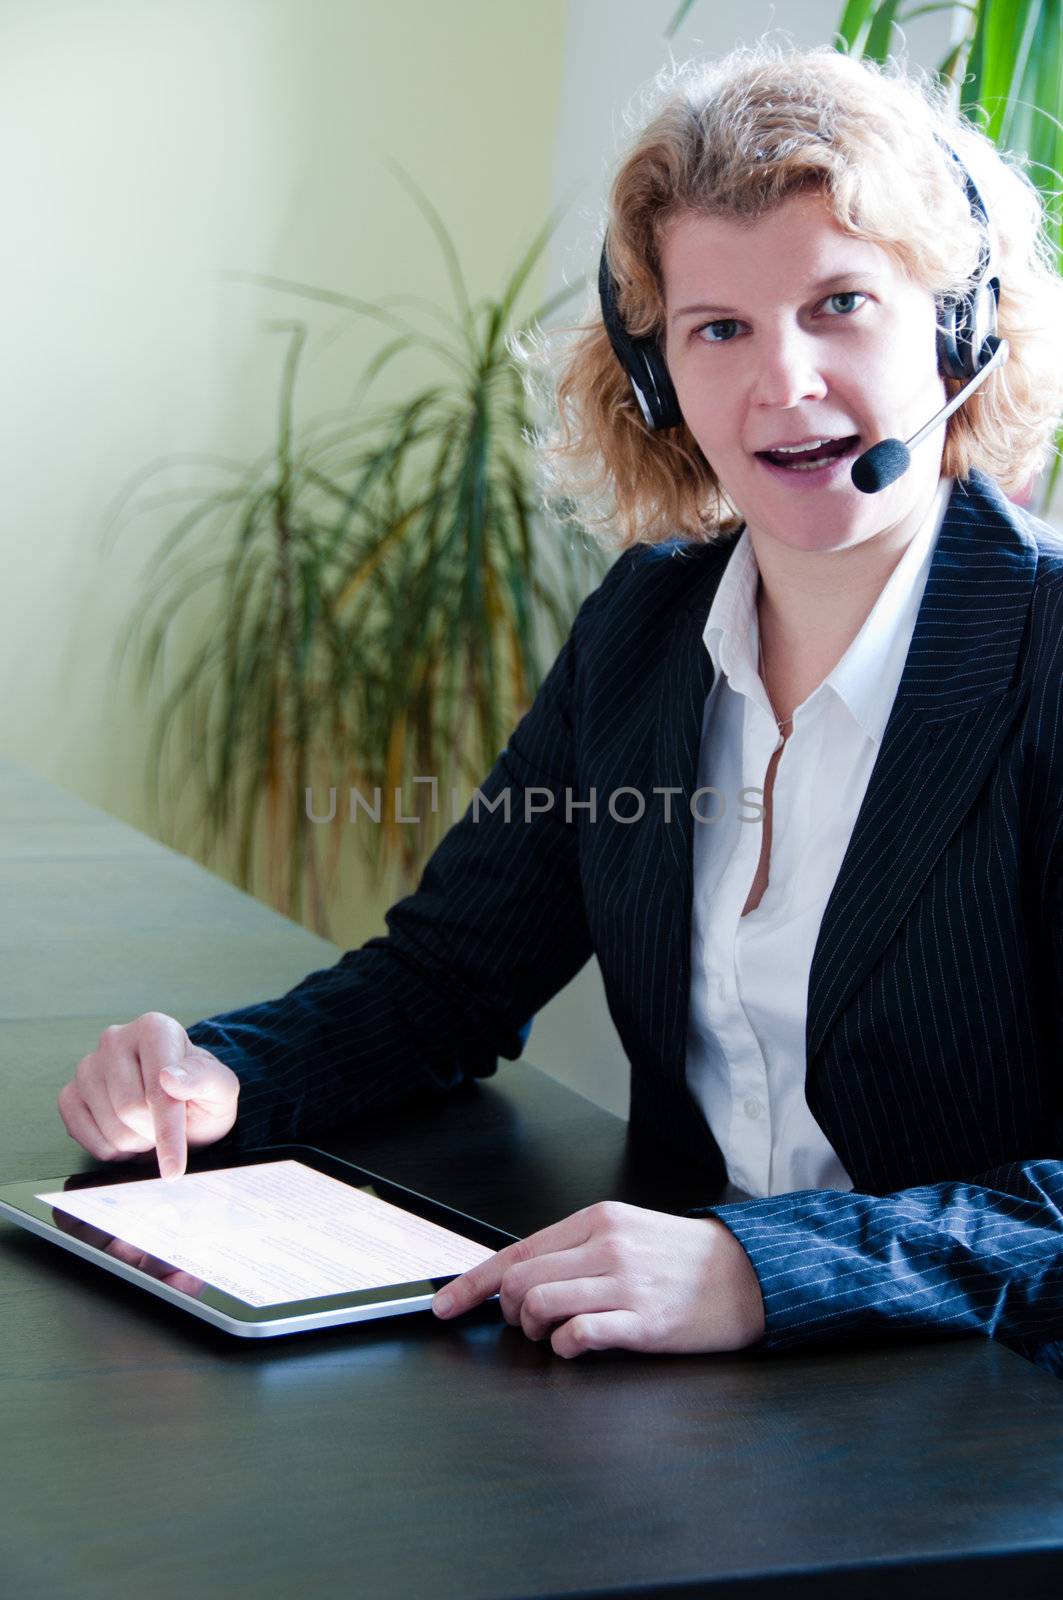 Closeup of a business woman using a tablet pc and talking into headset